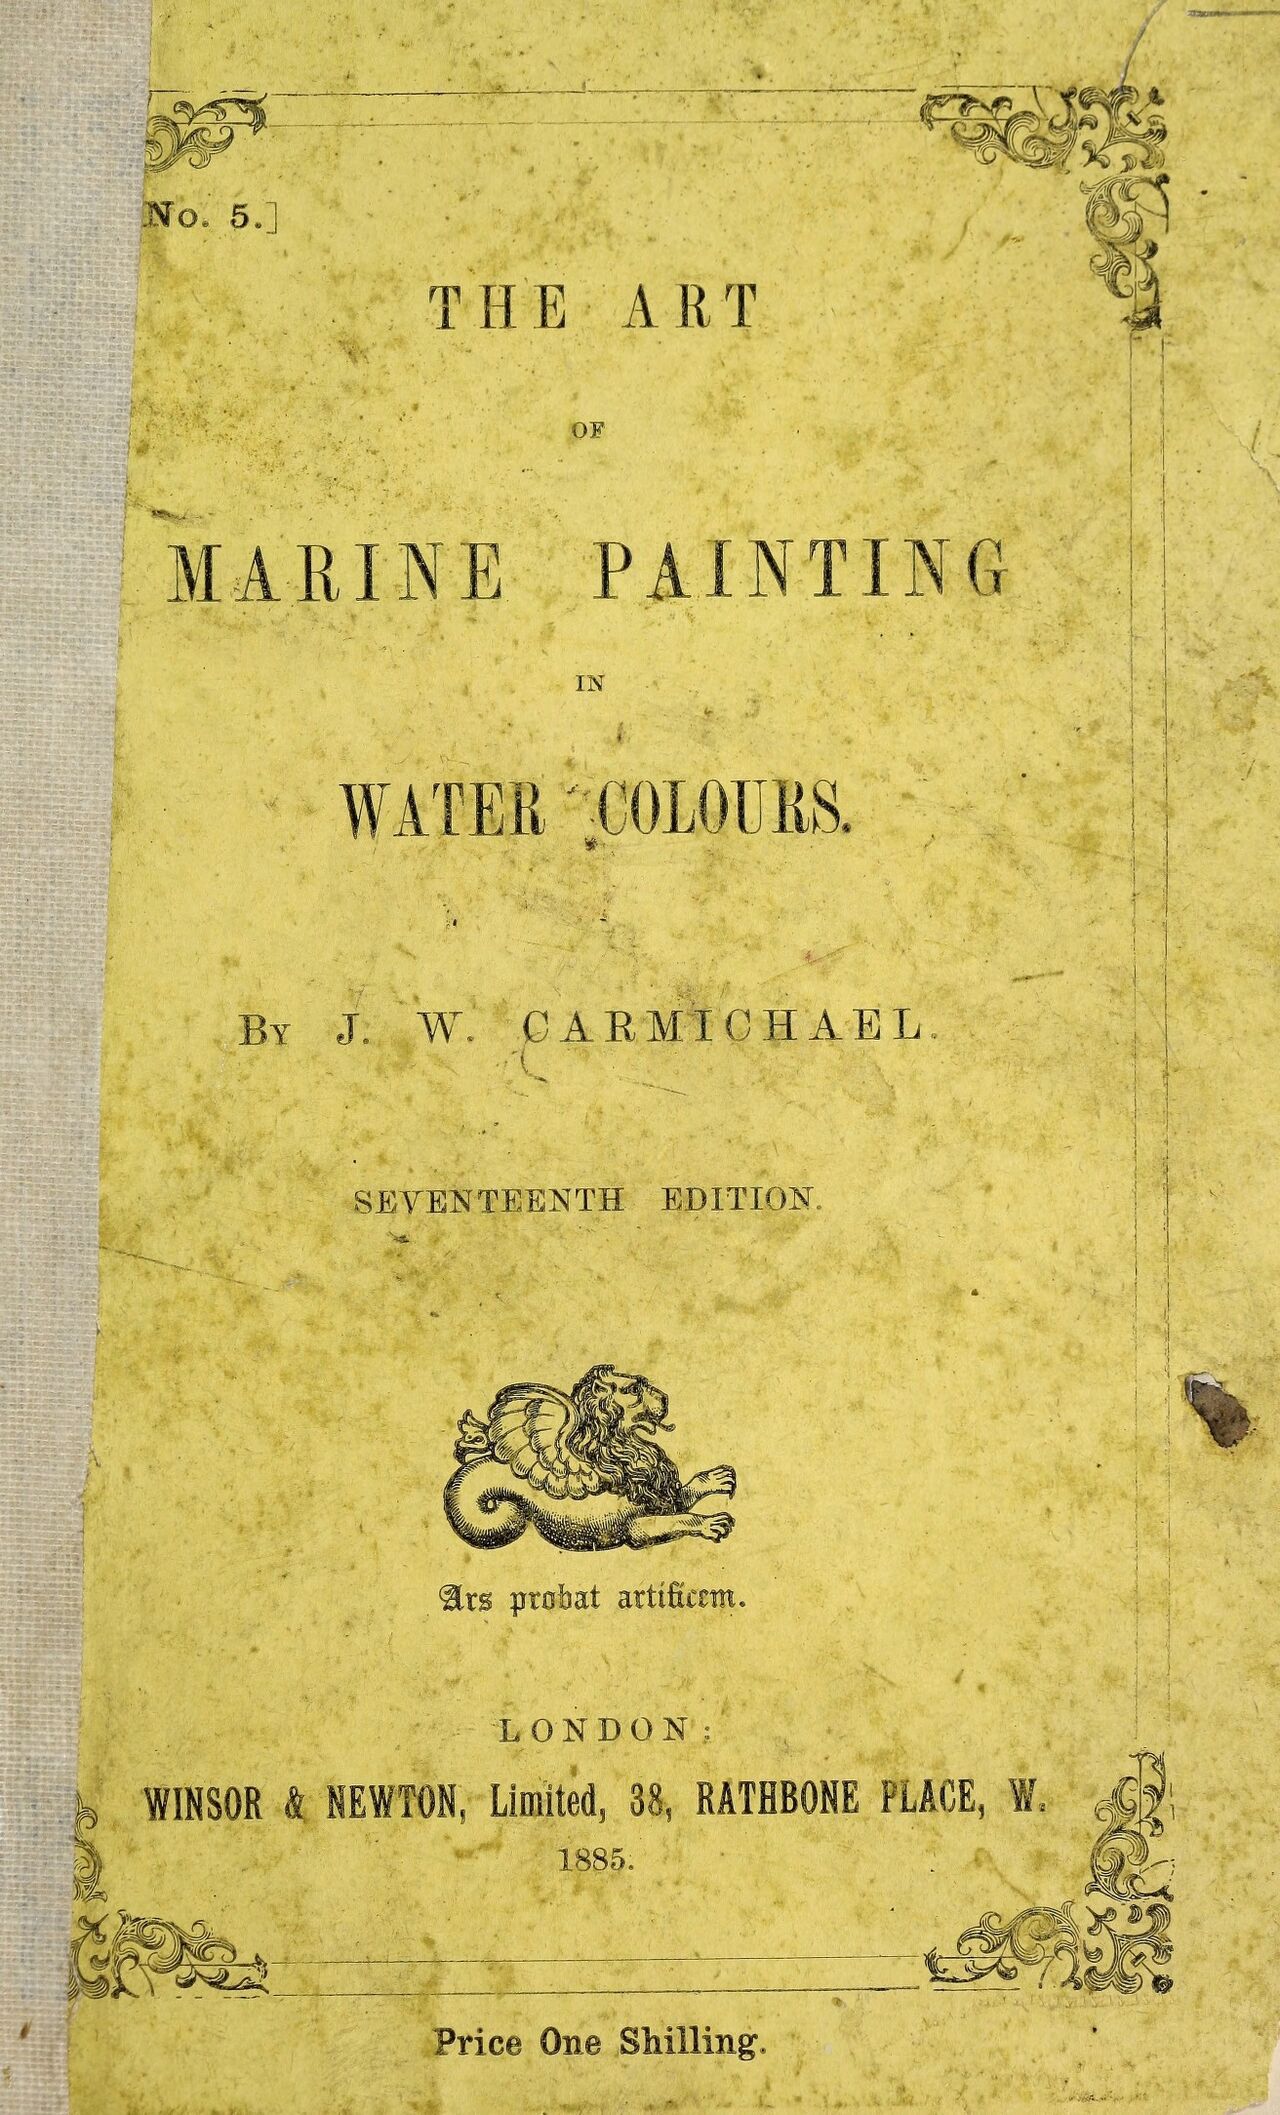 [John Wilson Carmichael] The art of marine painting in water-colours [English] 4